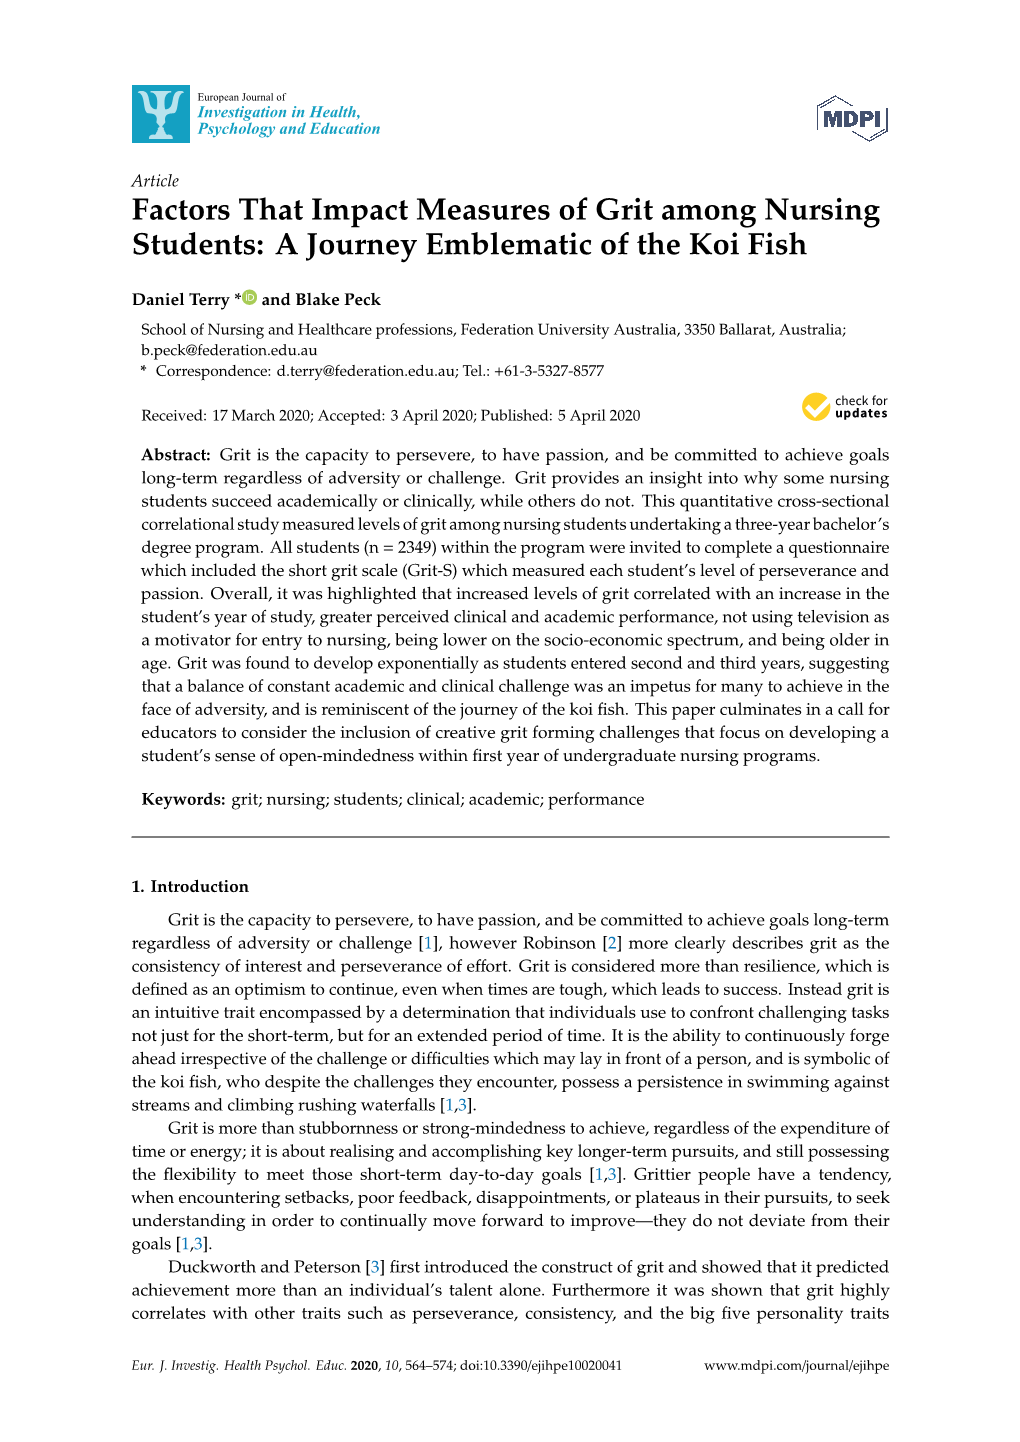 Factors That Impact Measures of Grit Among Nursing Students: a Journey Emblematic of the Koi Fish